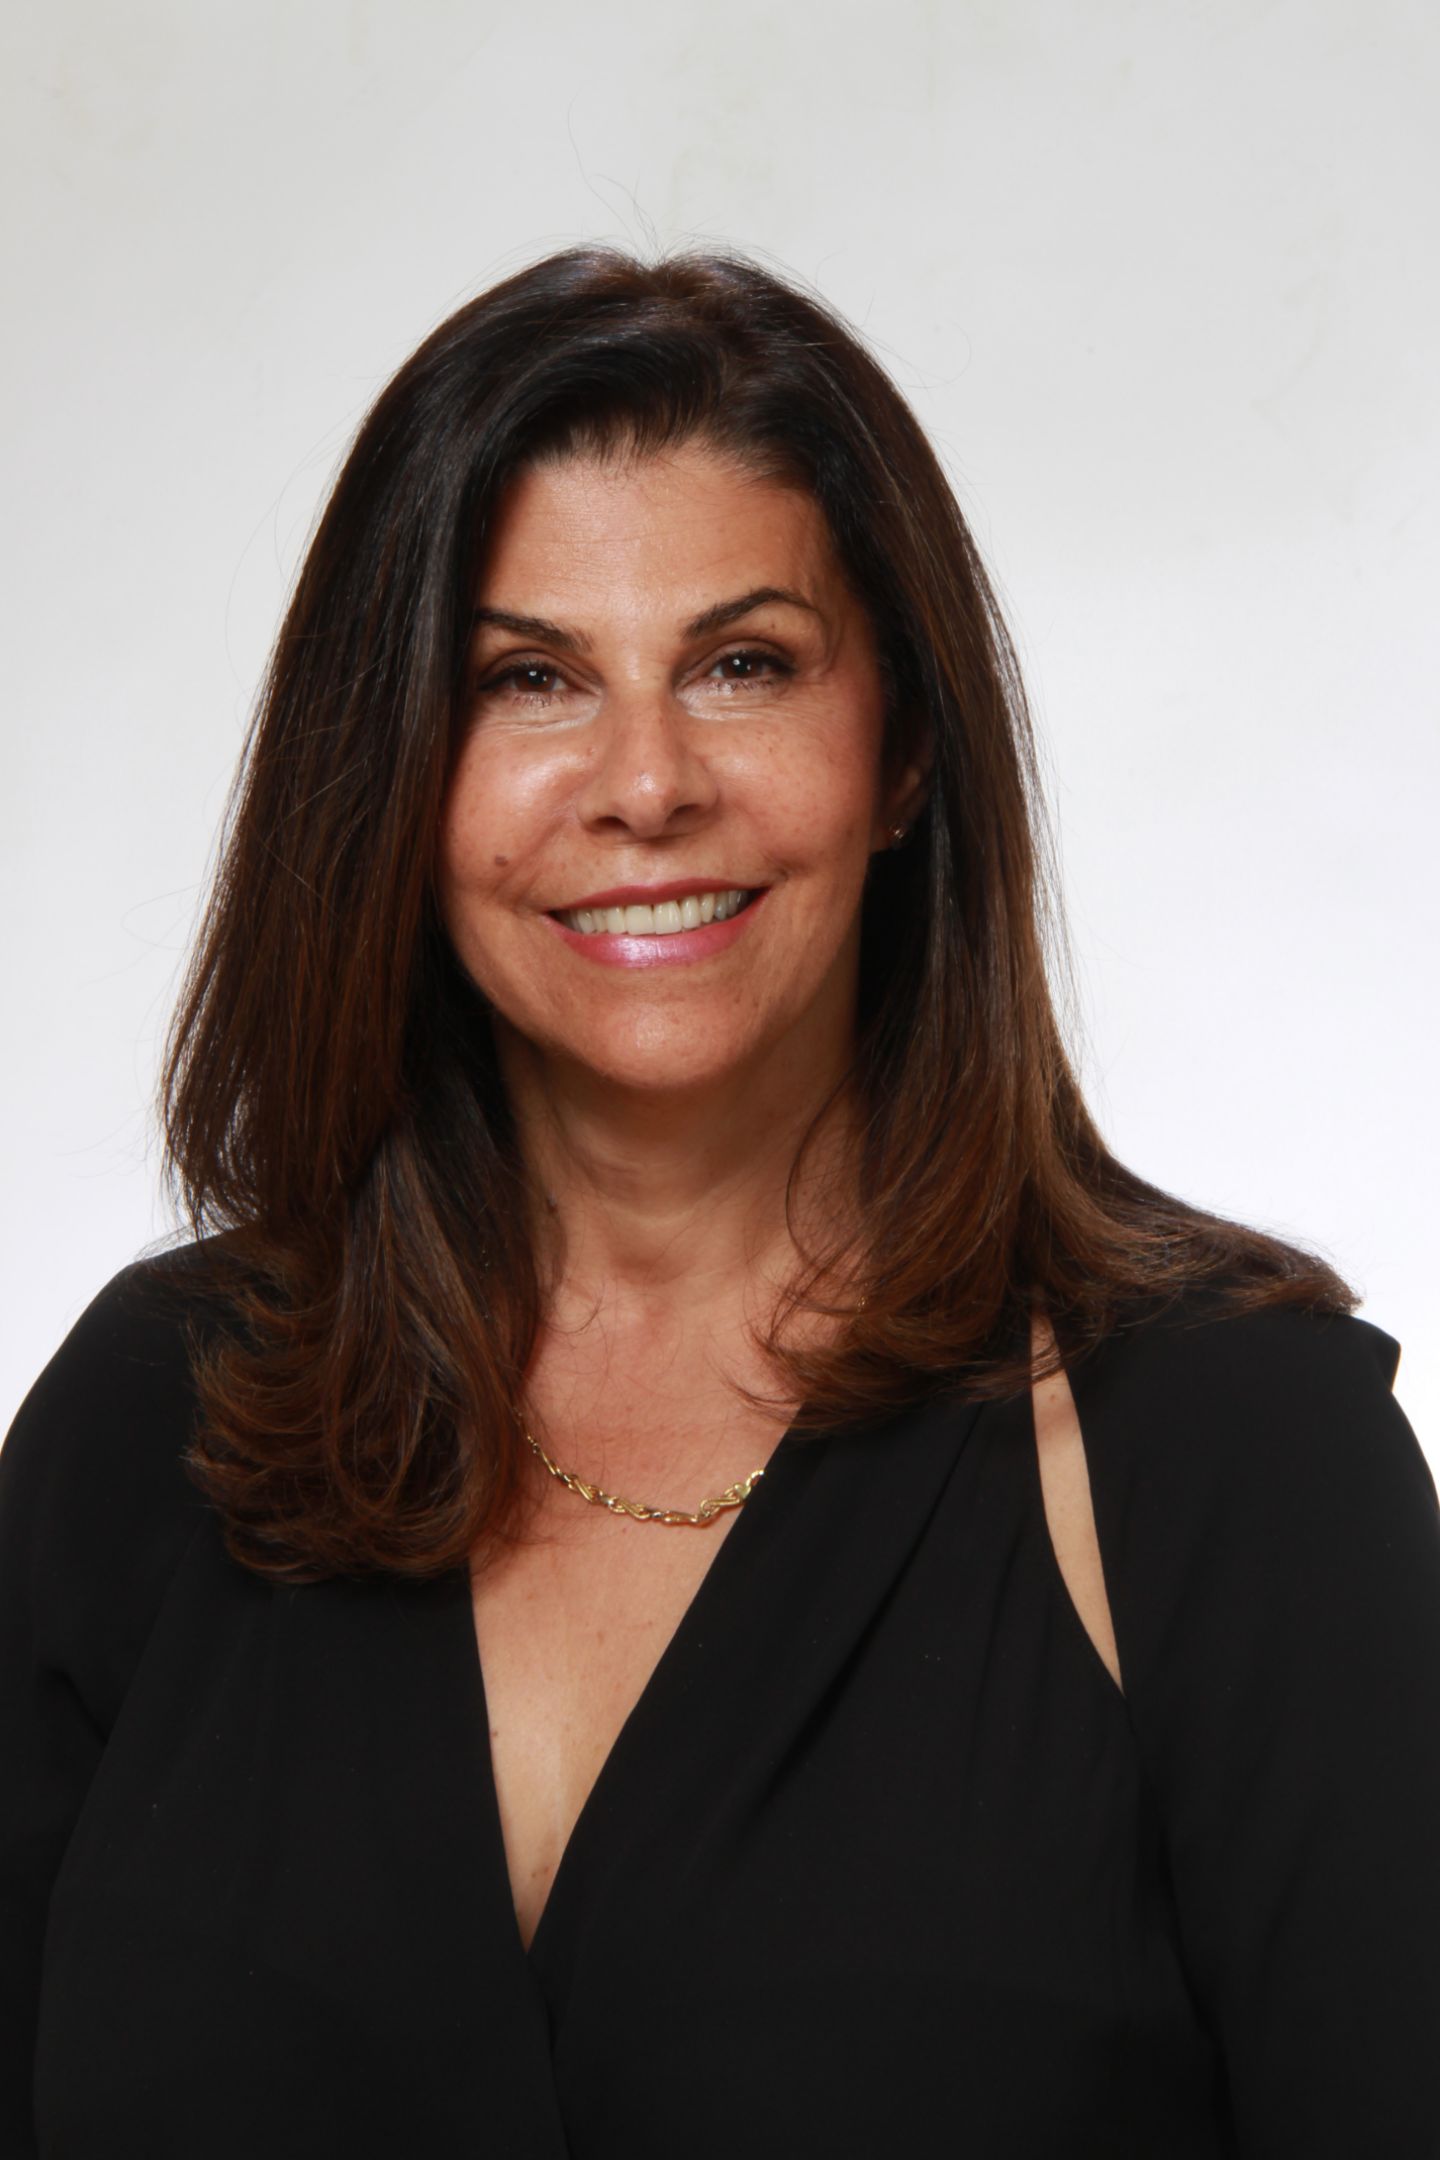 Irene Racanelli, Real Estate Agent - Manhasset, NY - Coldwell Banker Realty